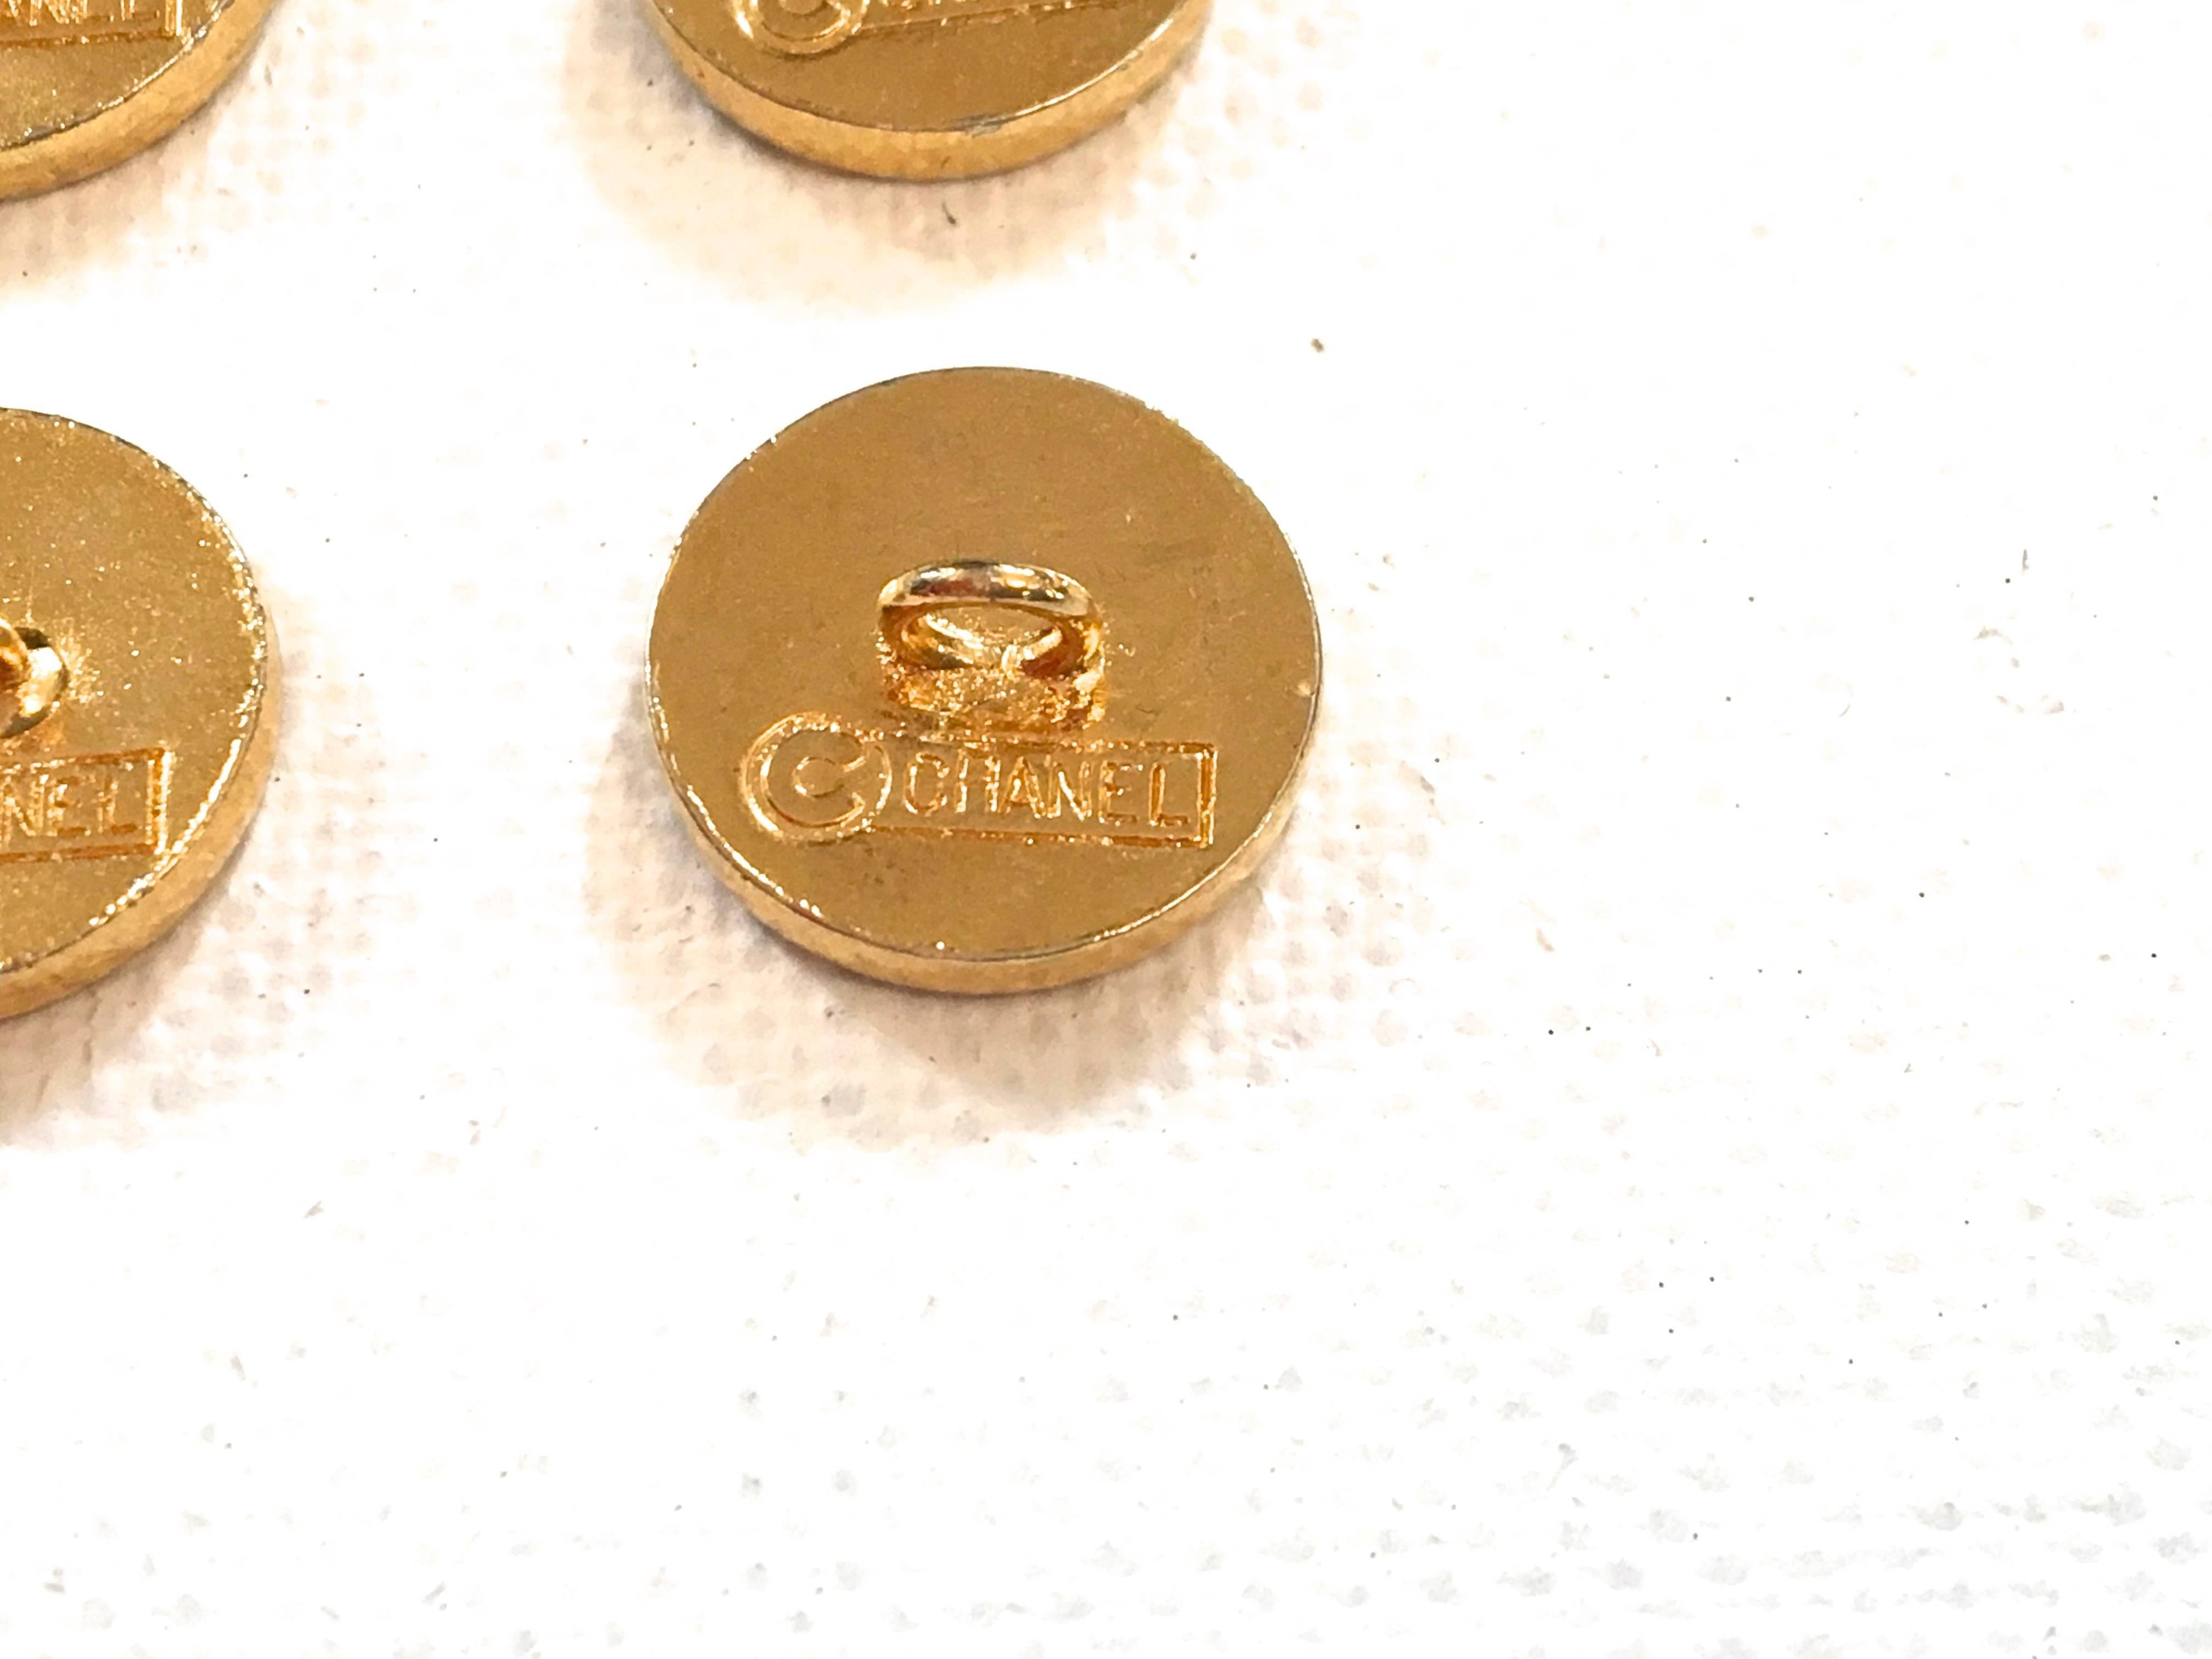 Women's or Men's Chanel Buttons - Rare Matching Gold Tone Buttons - 1980's